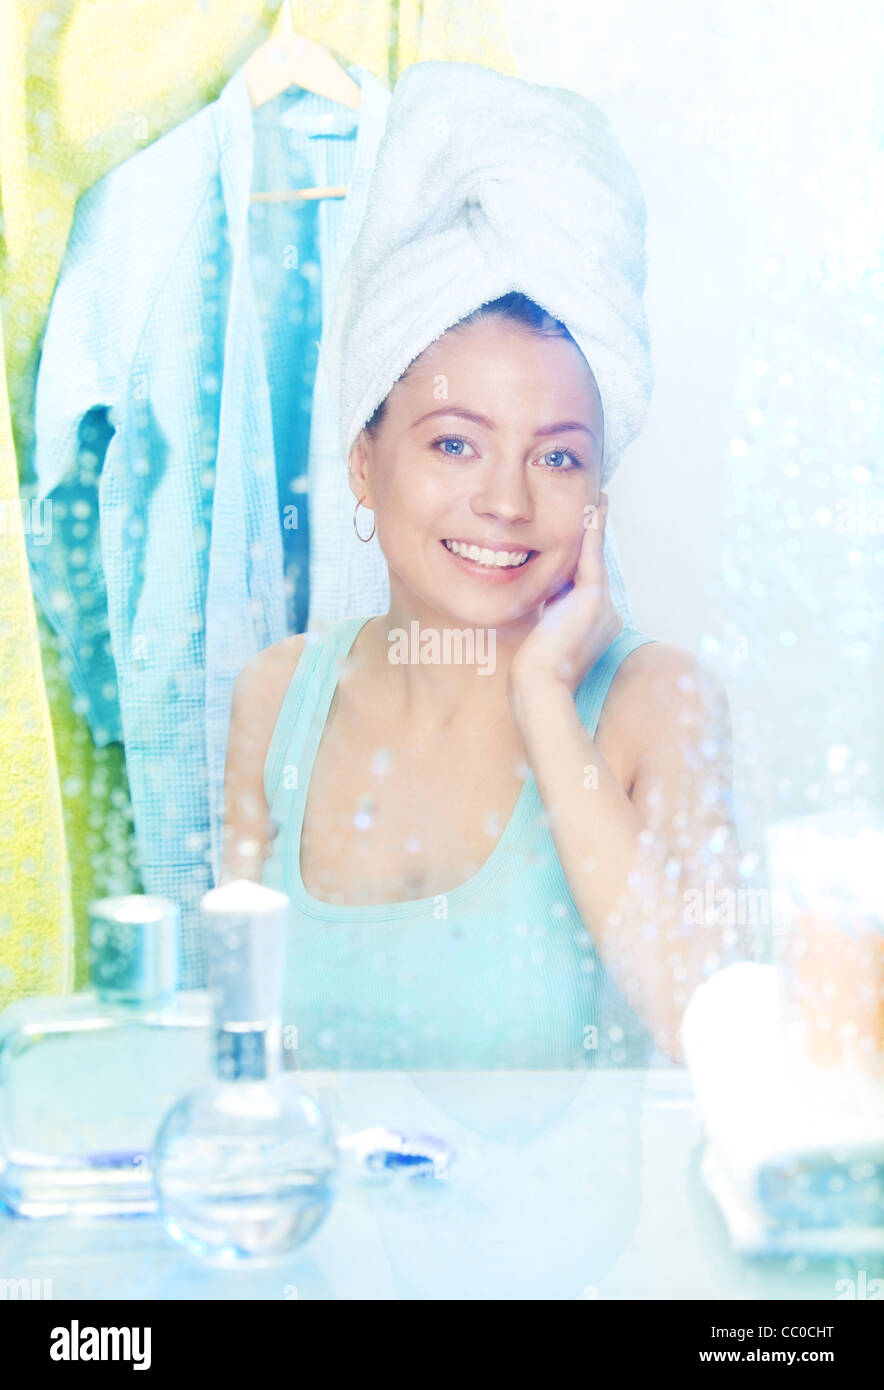 Camera behind the mirror - woman having a shower and smiling Stock Photo